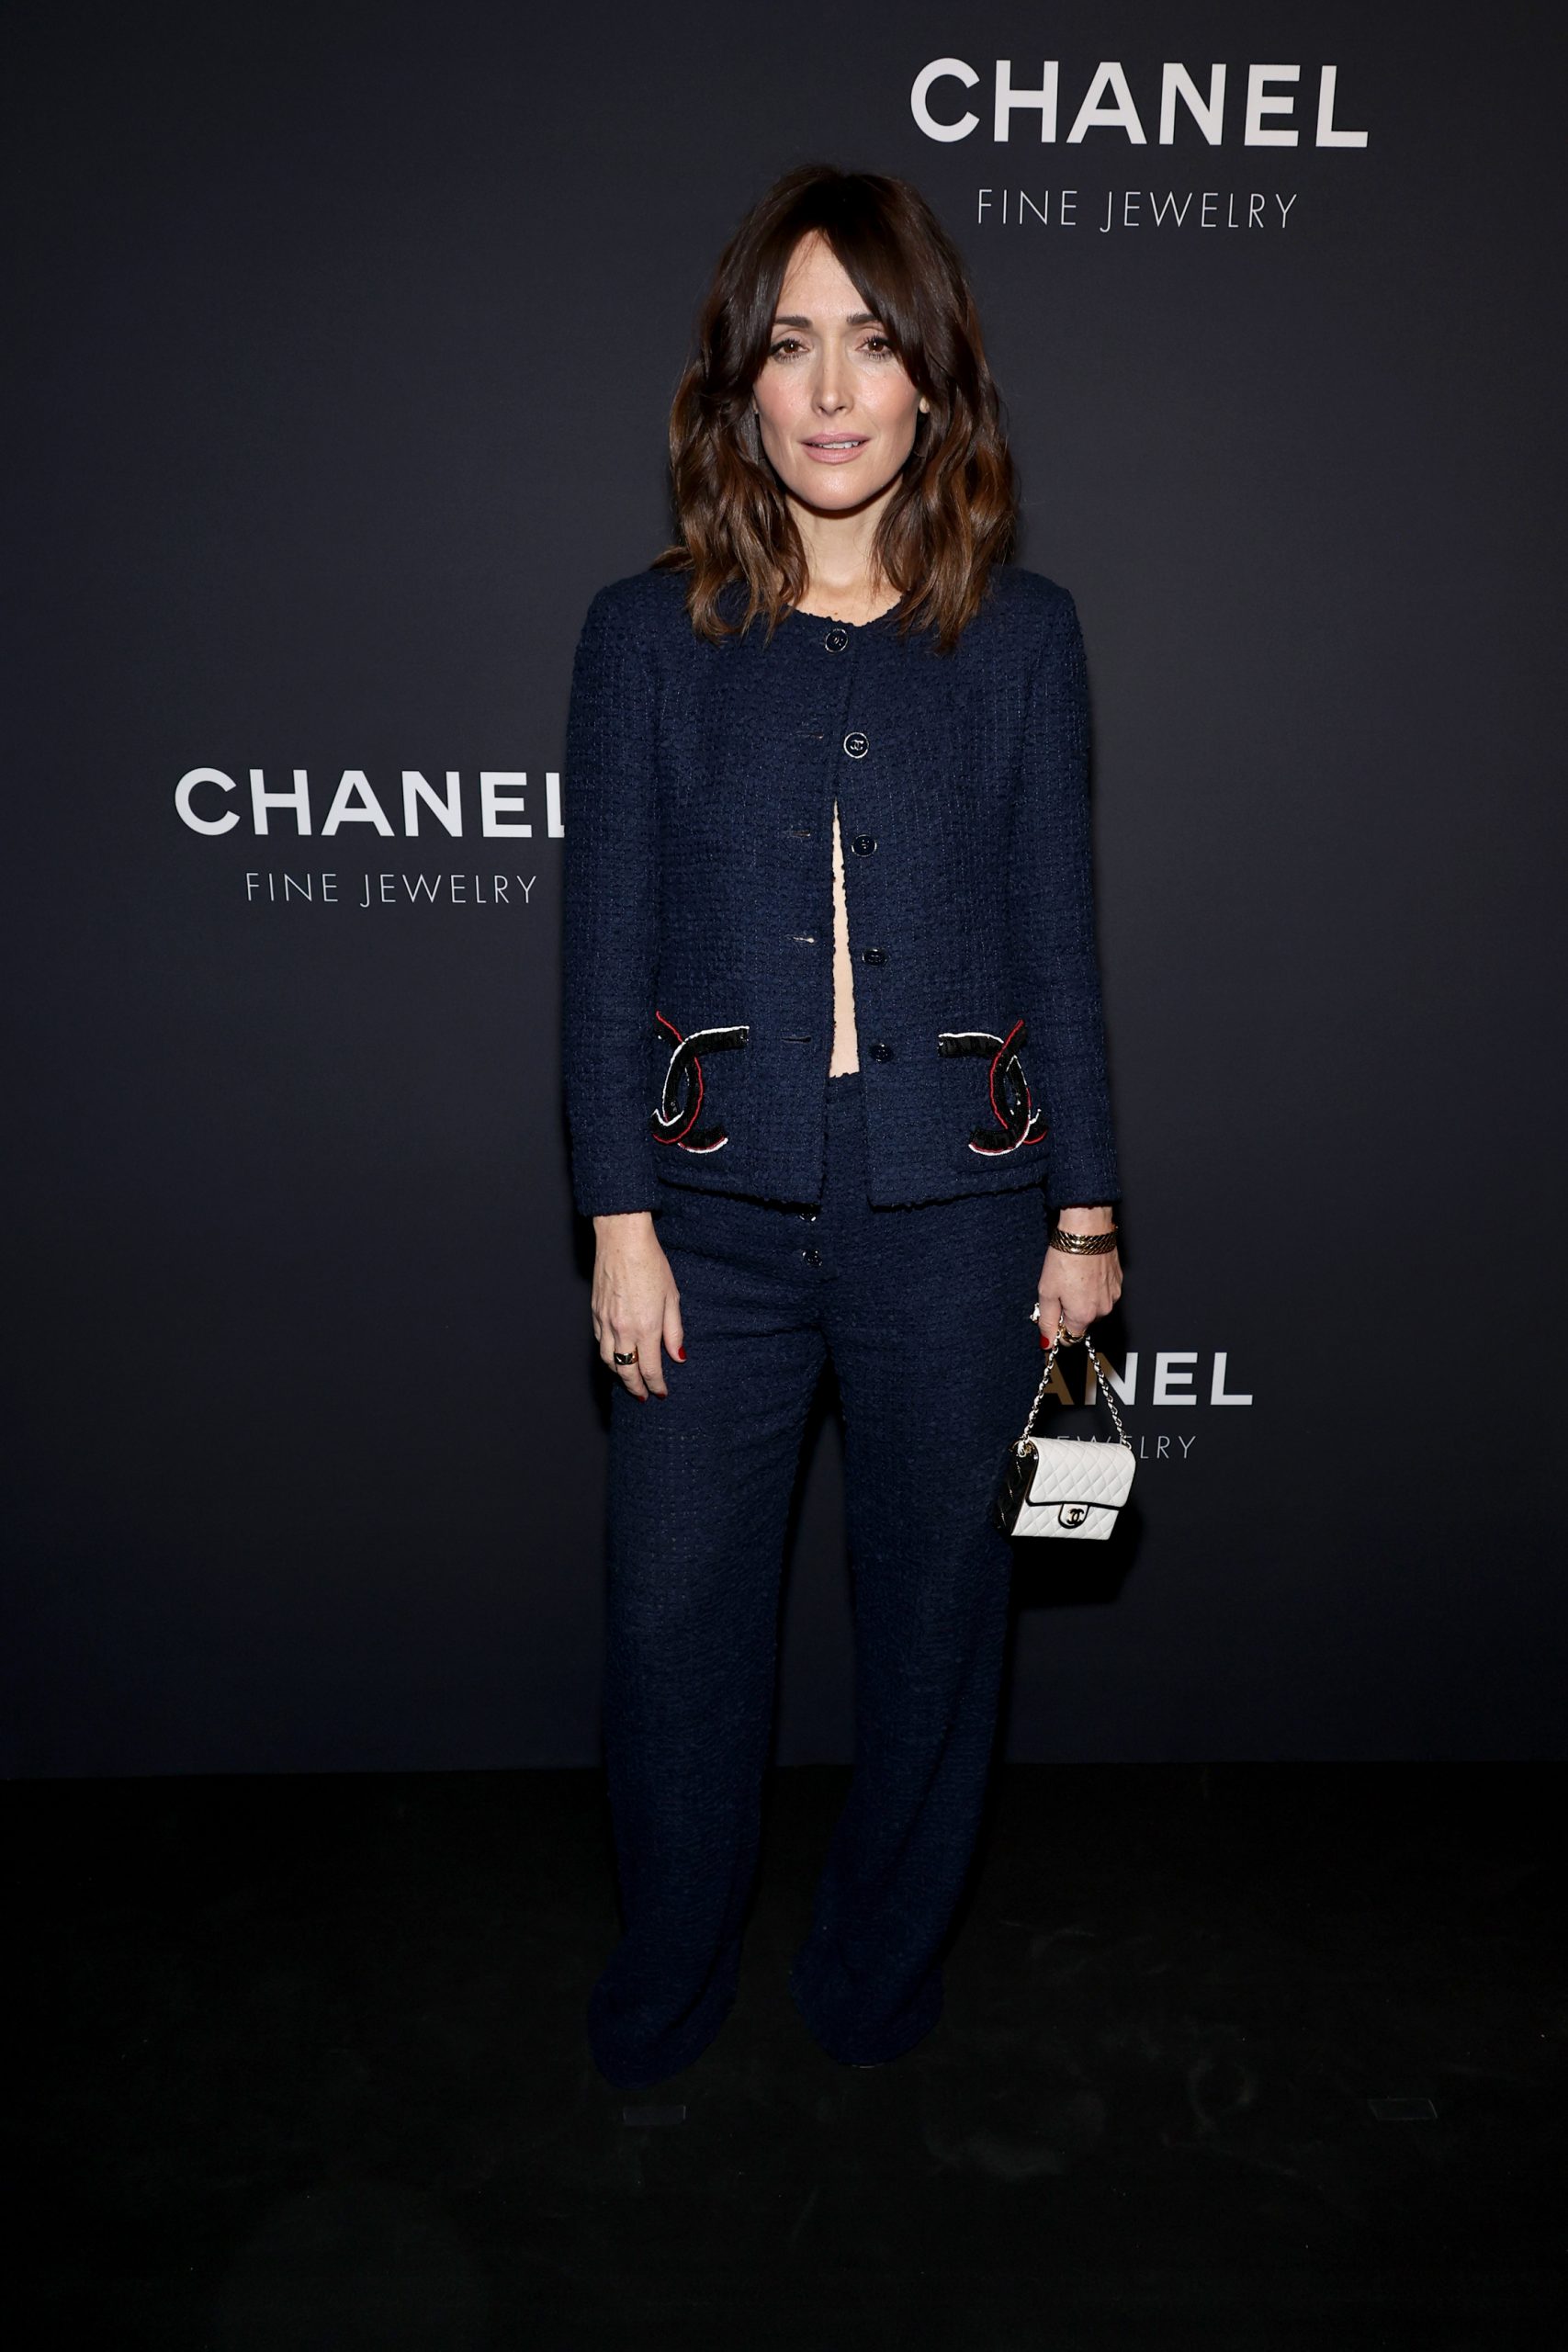 NEW YORK, NEW YORK - FEBRUARY 07: Rose Byrne, wearing CHANEL, attends the CHANEL Dinner to celebrate the Watches & Fine Jewelry Fifth Avenue Flagship Boutique Opening on February 07, 2024 in New York City. (Photo by Jamie McCarthy/WireImage)